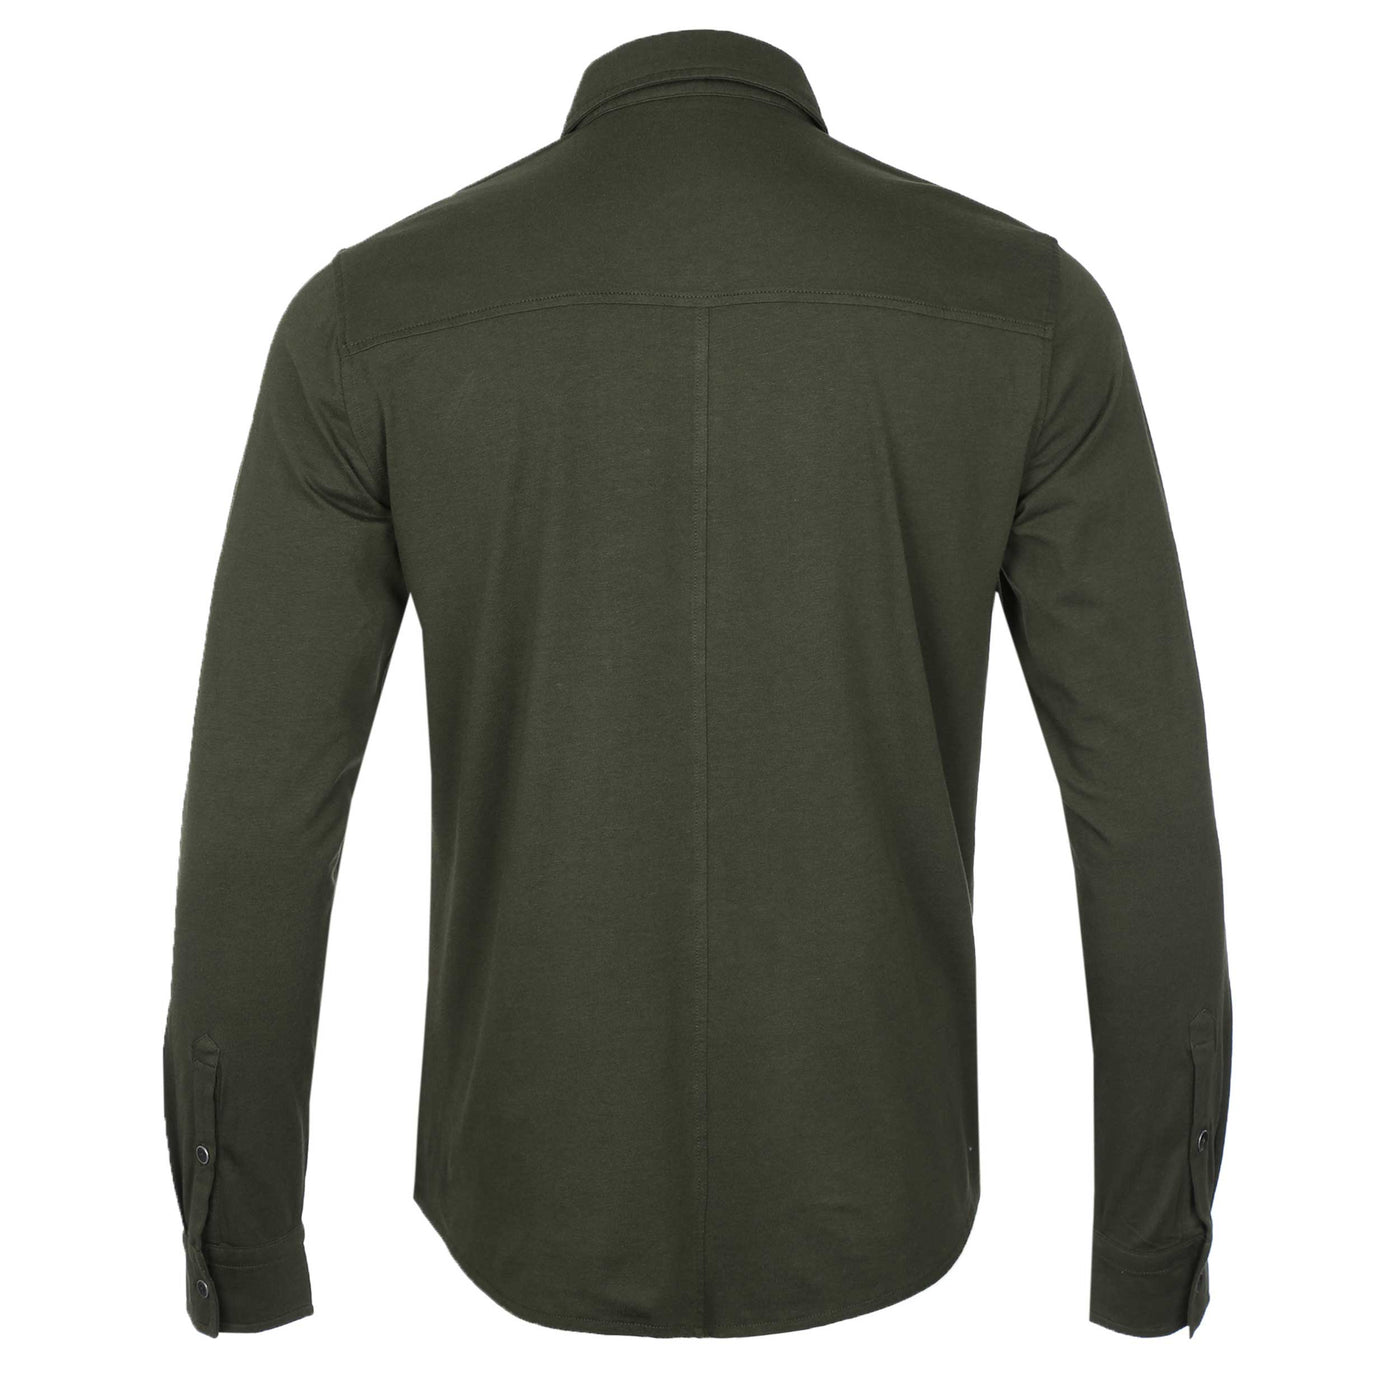 Paige Stockton Shirt in Mountain Pine Green Back